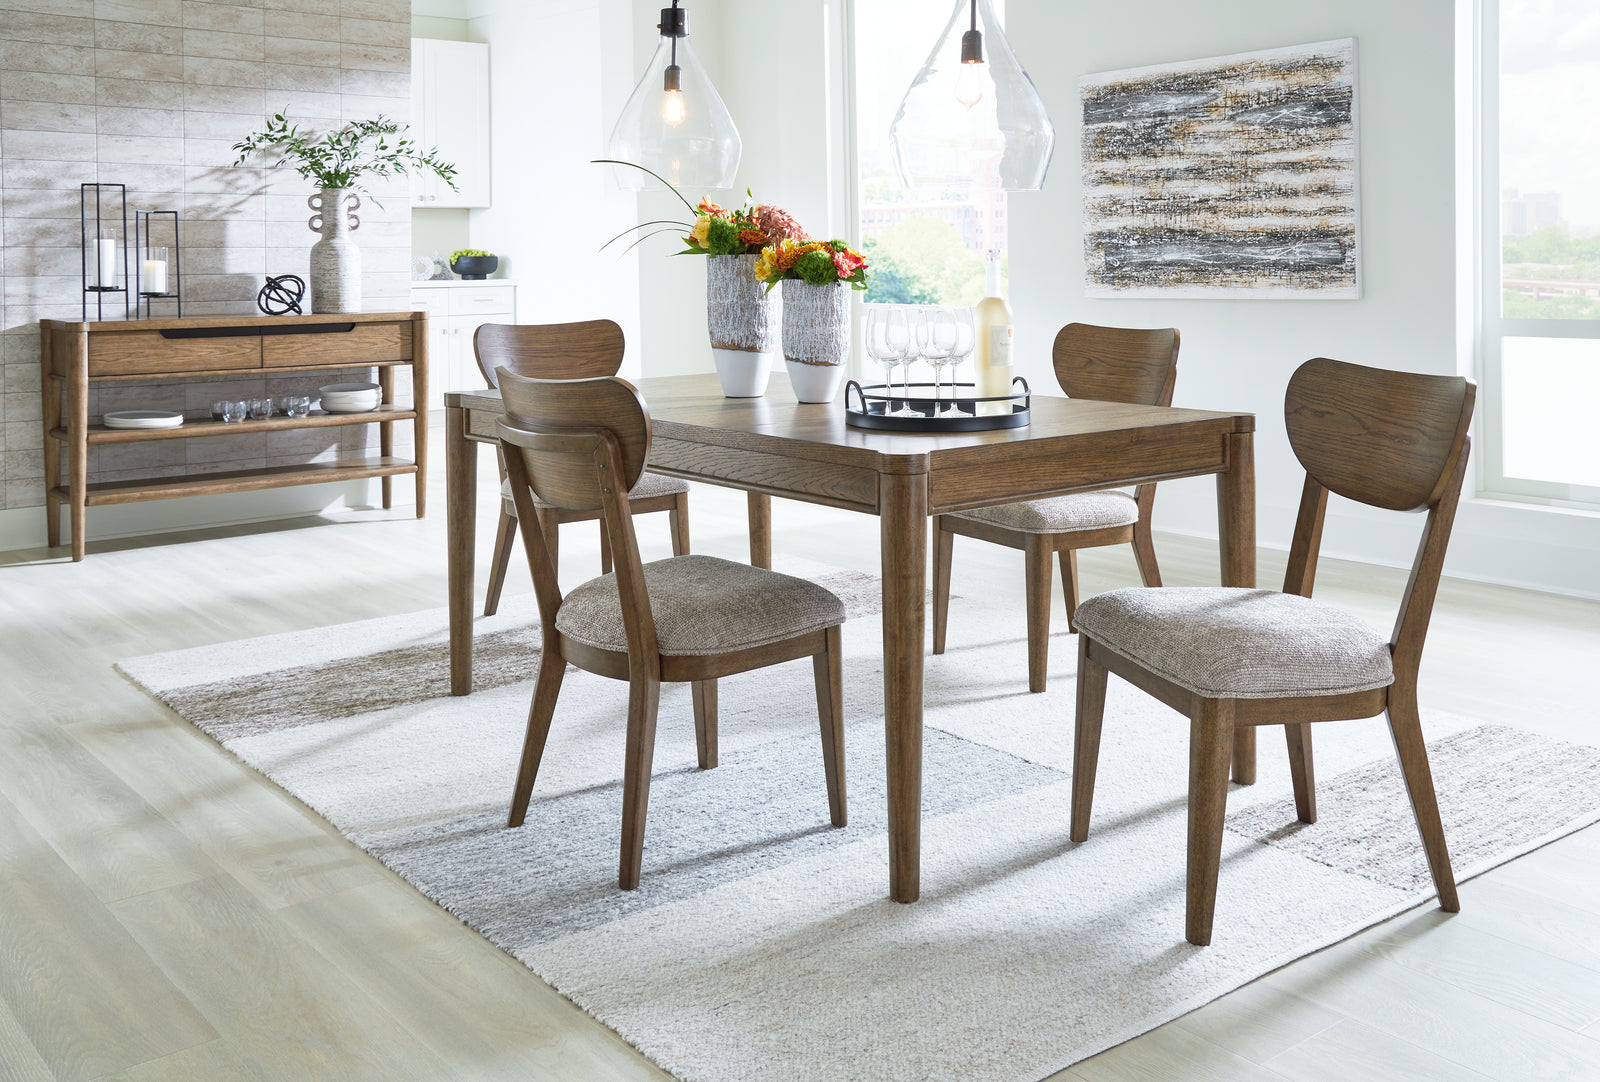 Roanhowe Brown Dining Table And 4 Chairs